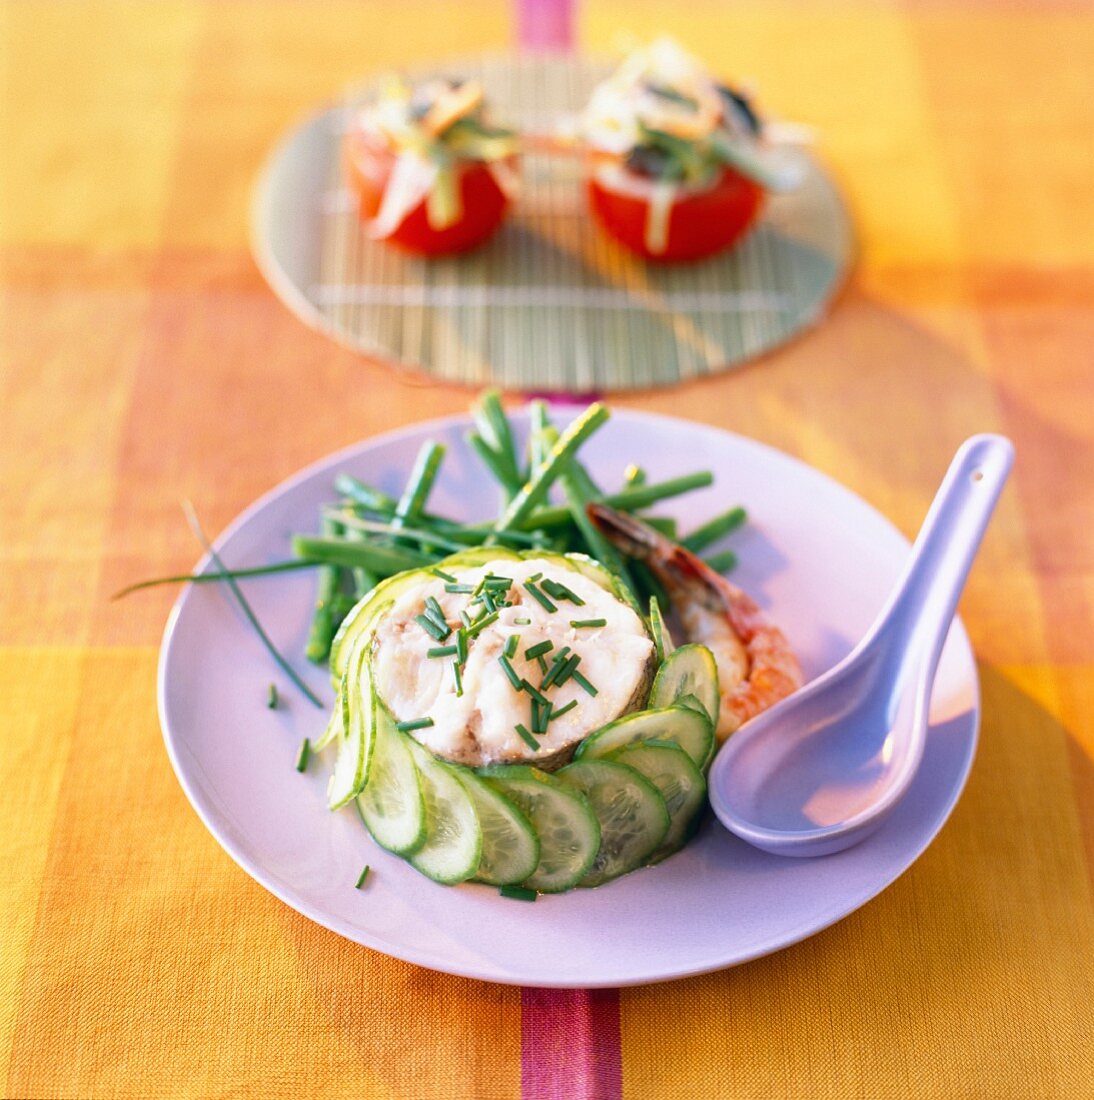 Fish pâté with cucumber and beans